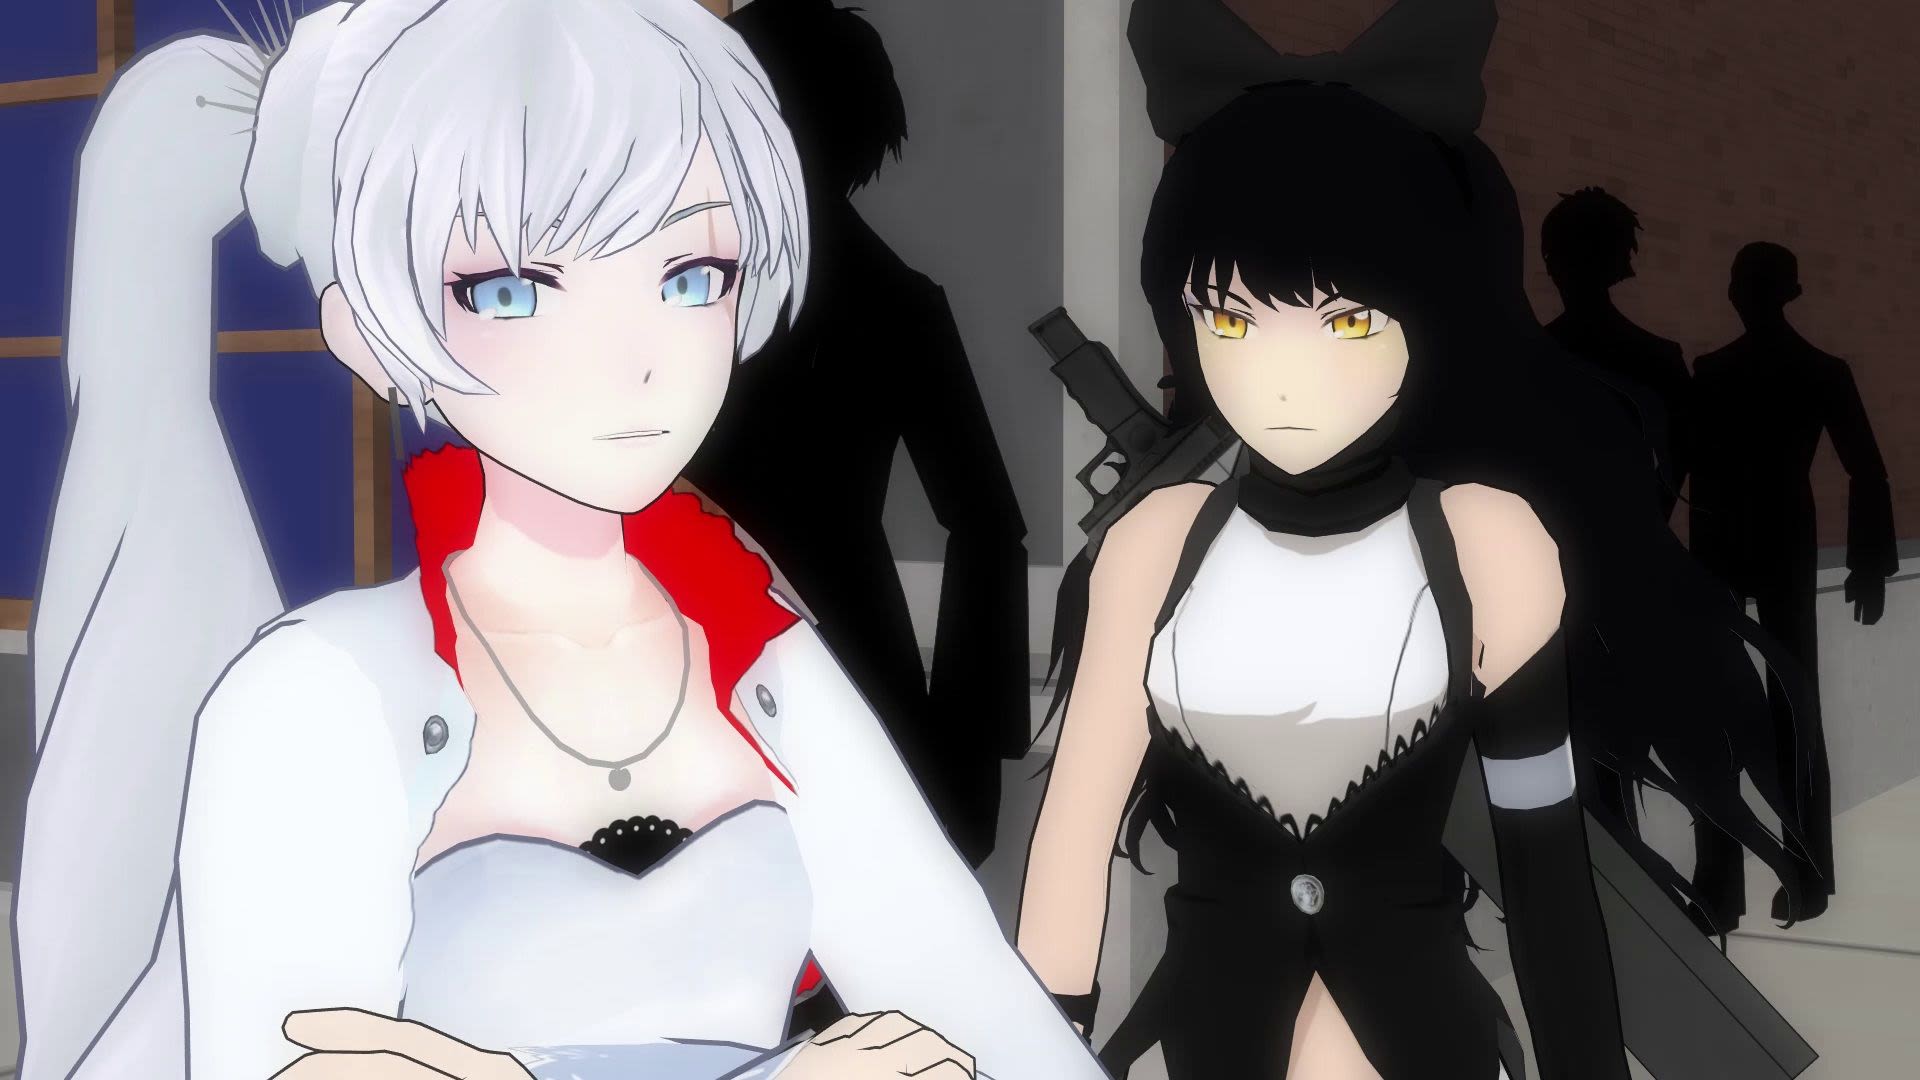 Rooster Teeth Announces RWBY Ice Queendom Anime by Shaft